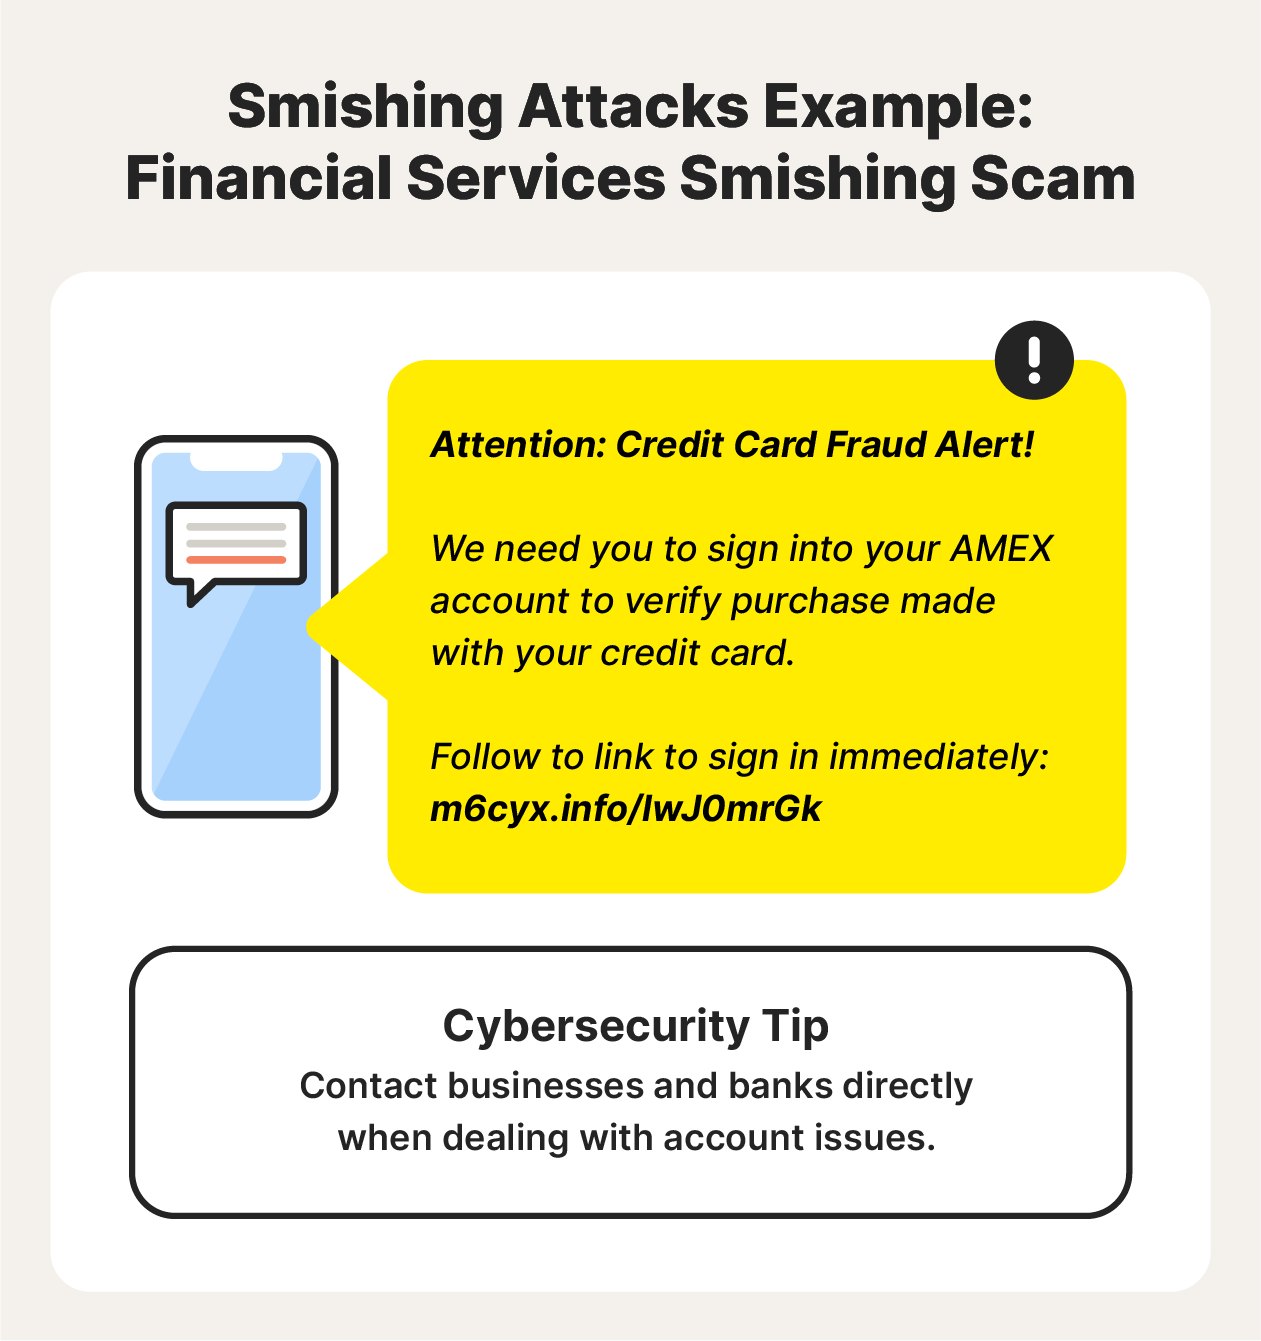 A common smishing example is a financial services scam.